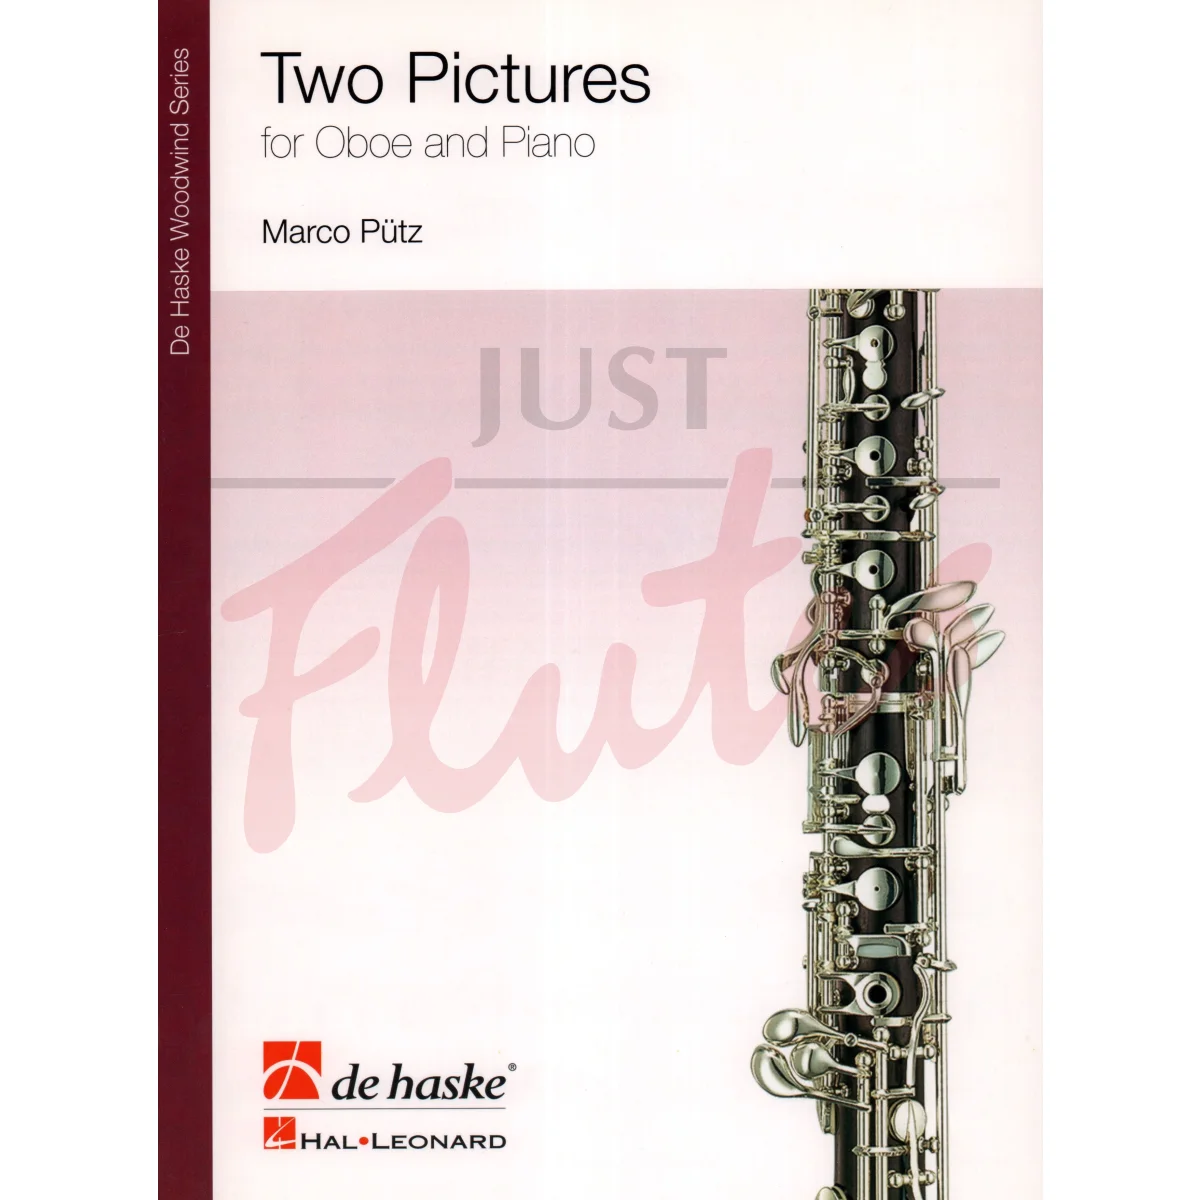 Two Pictures for Oboe and Piano